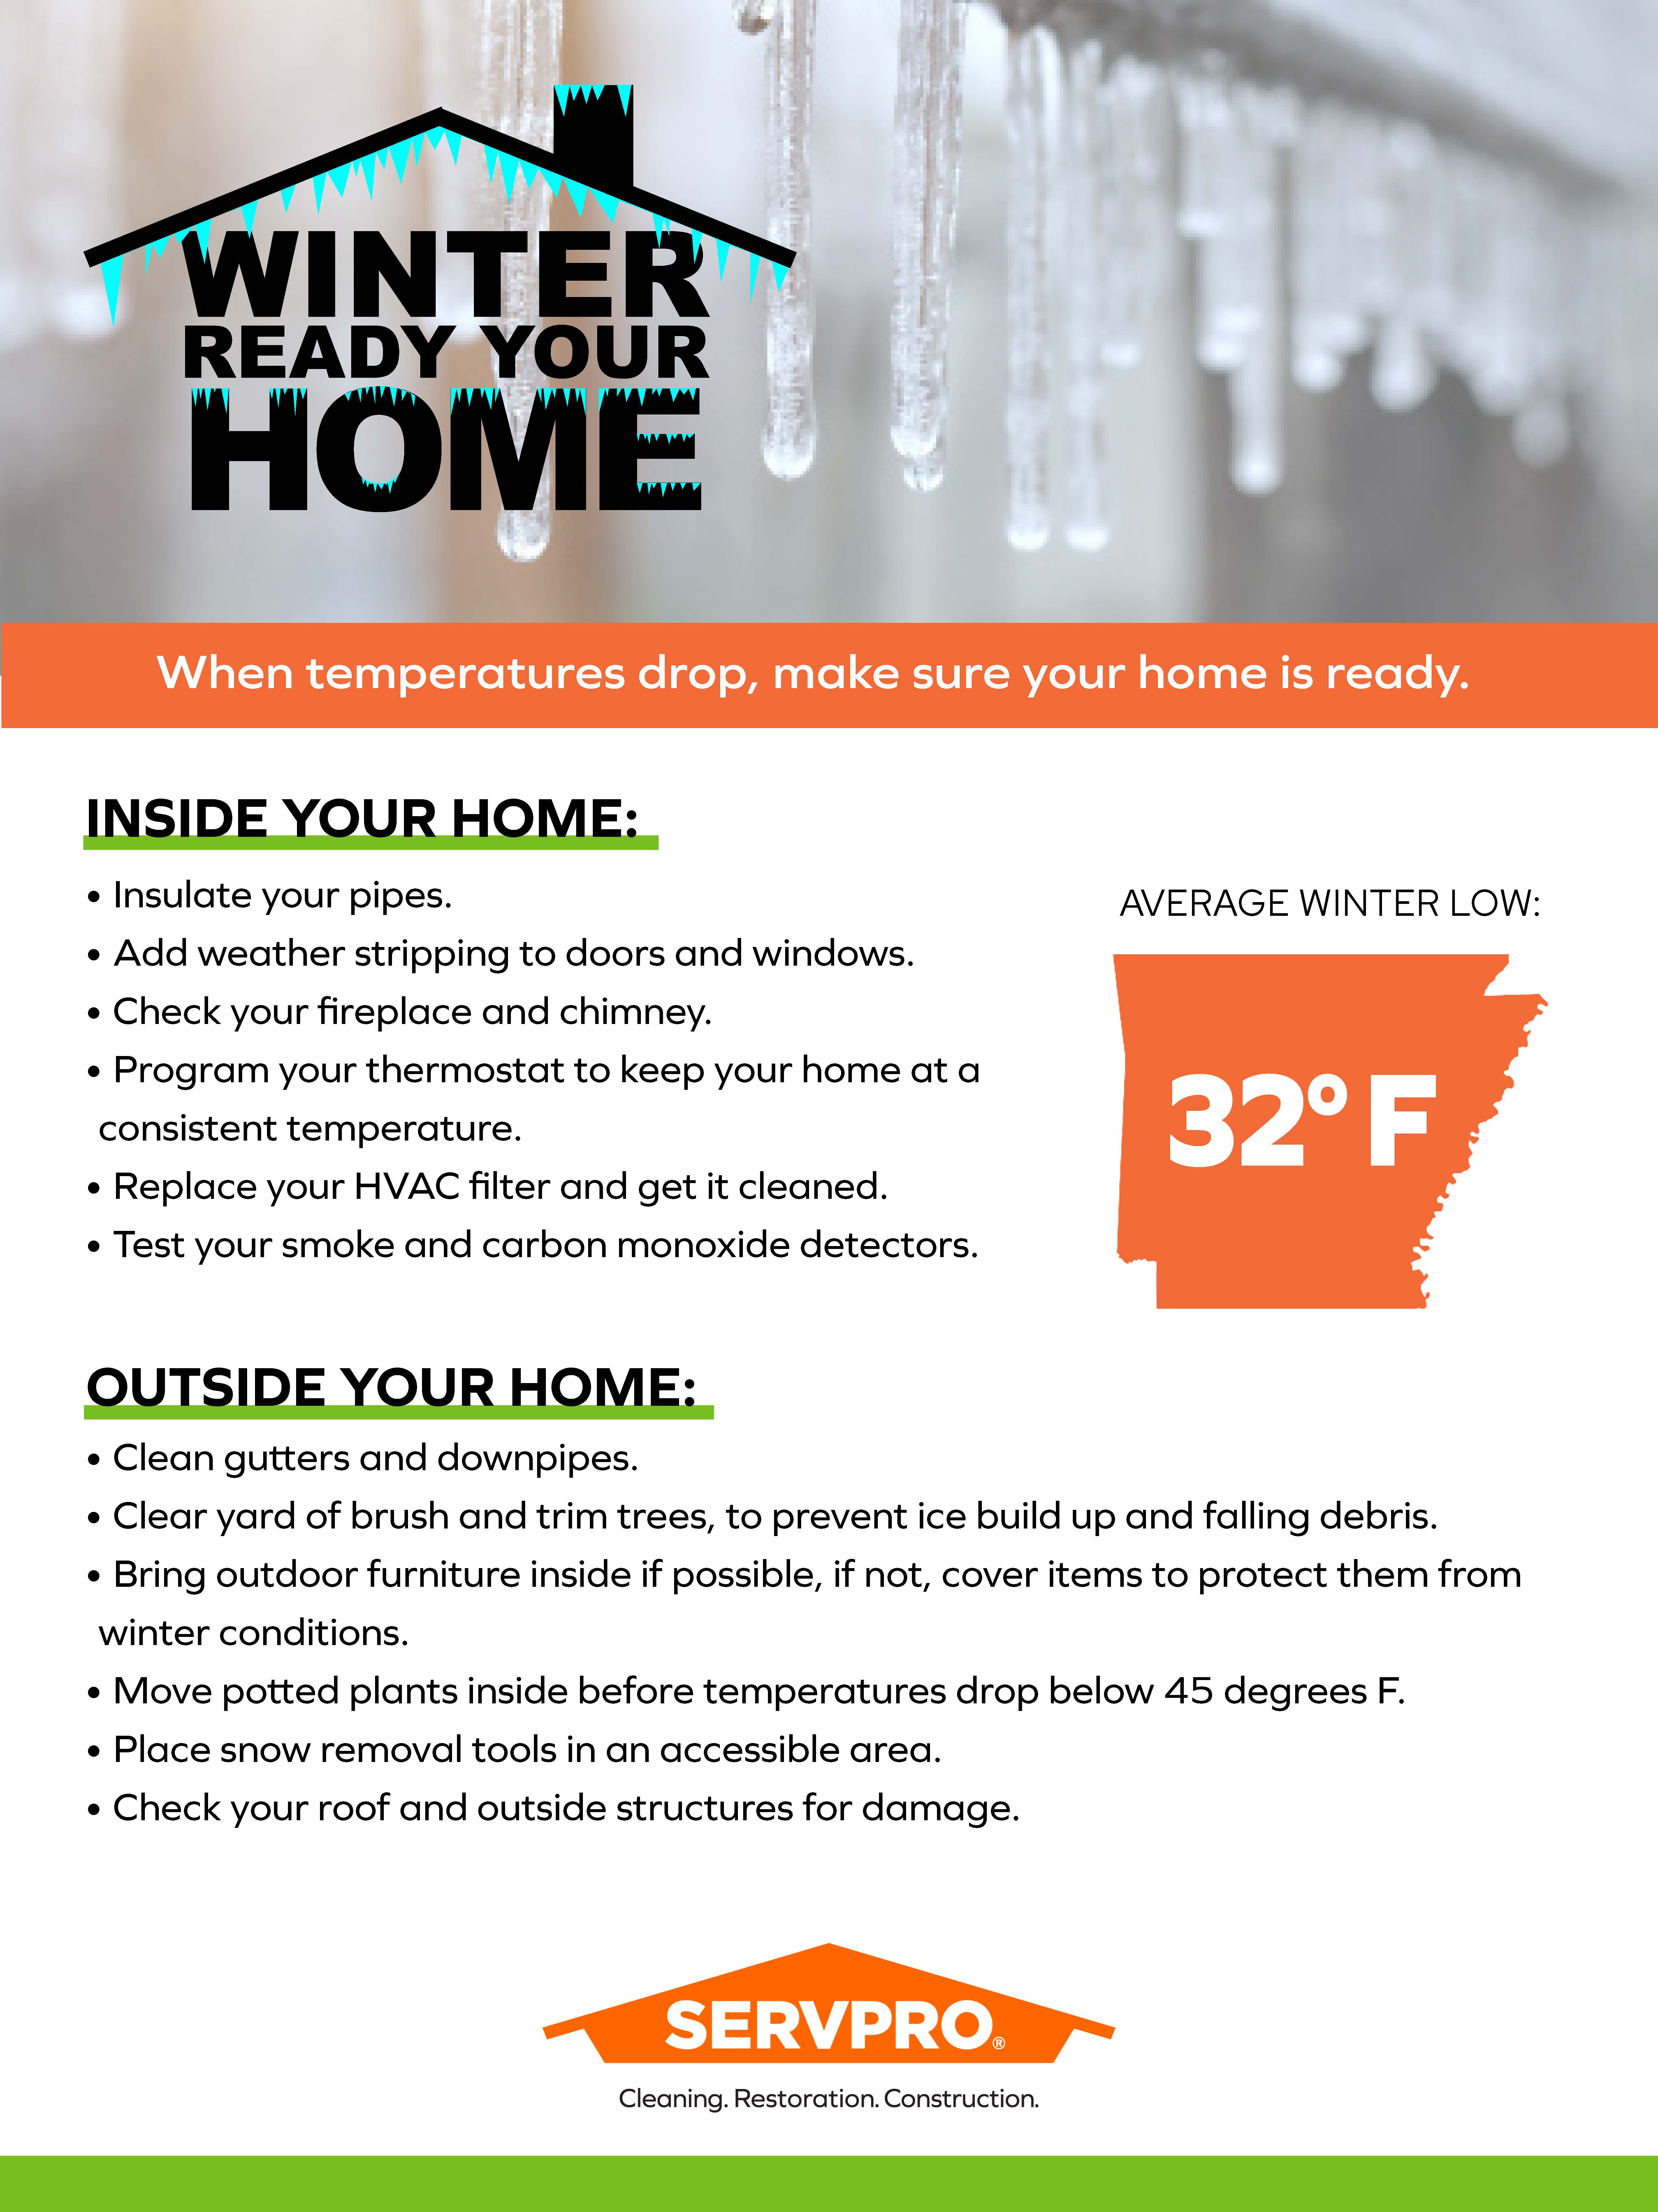 Winter Ready Your Home - ServPro